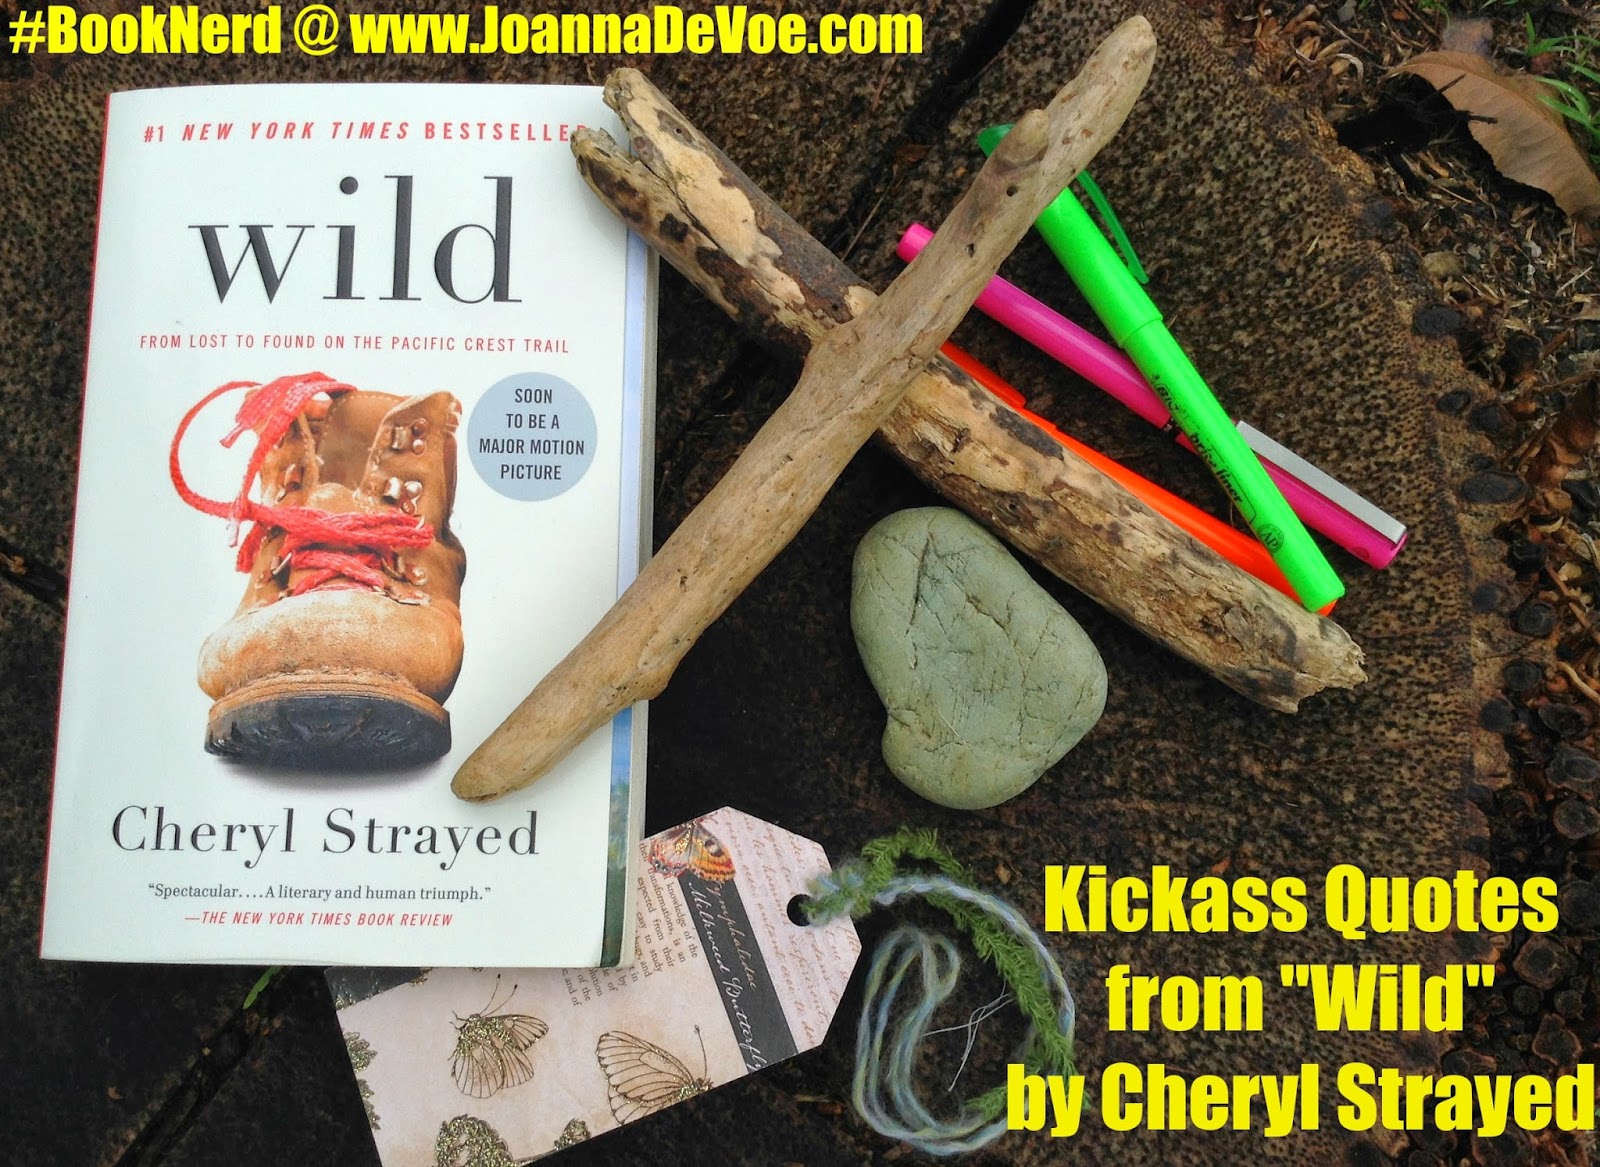 BOOK NERD Kickass Quotes from Wild by Cheryl Strayed